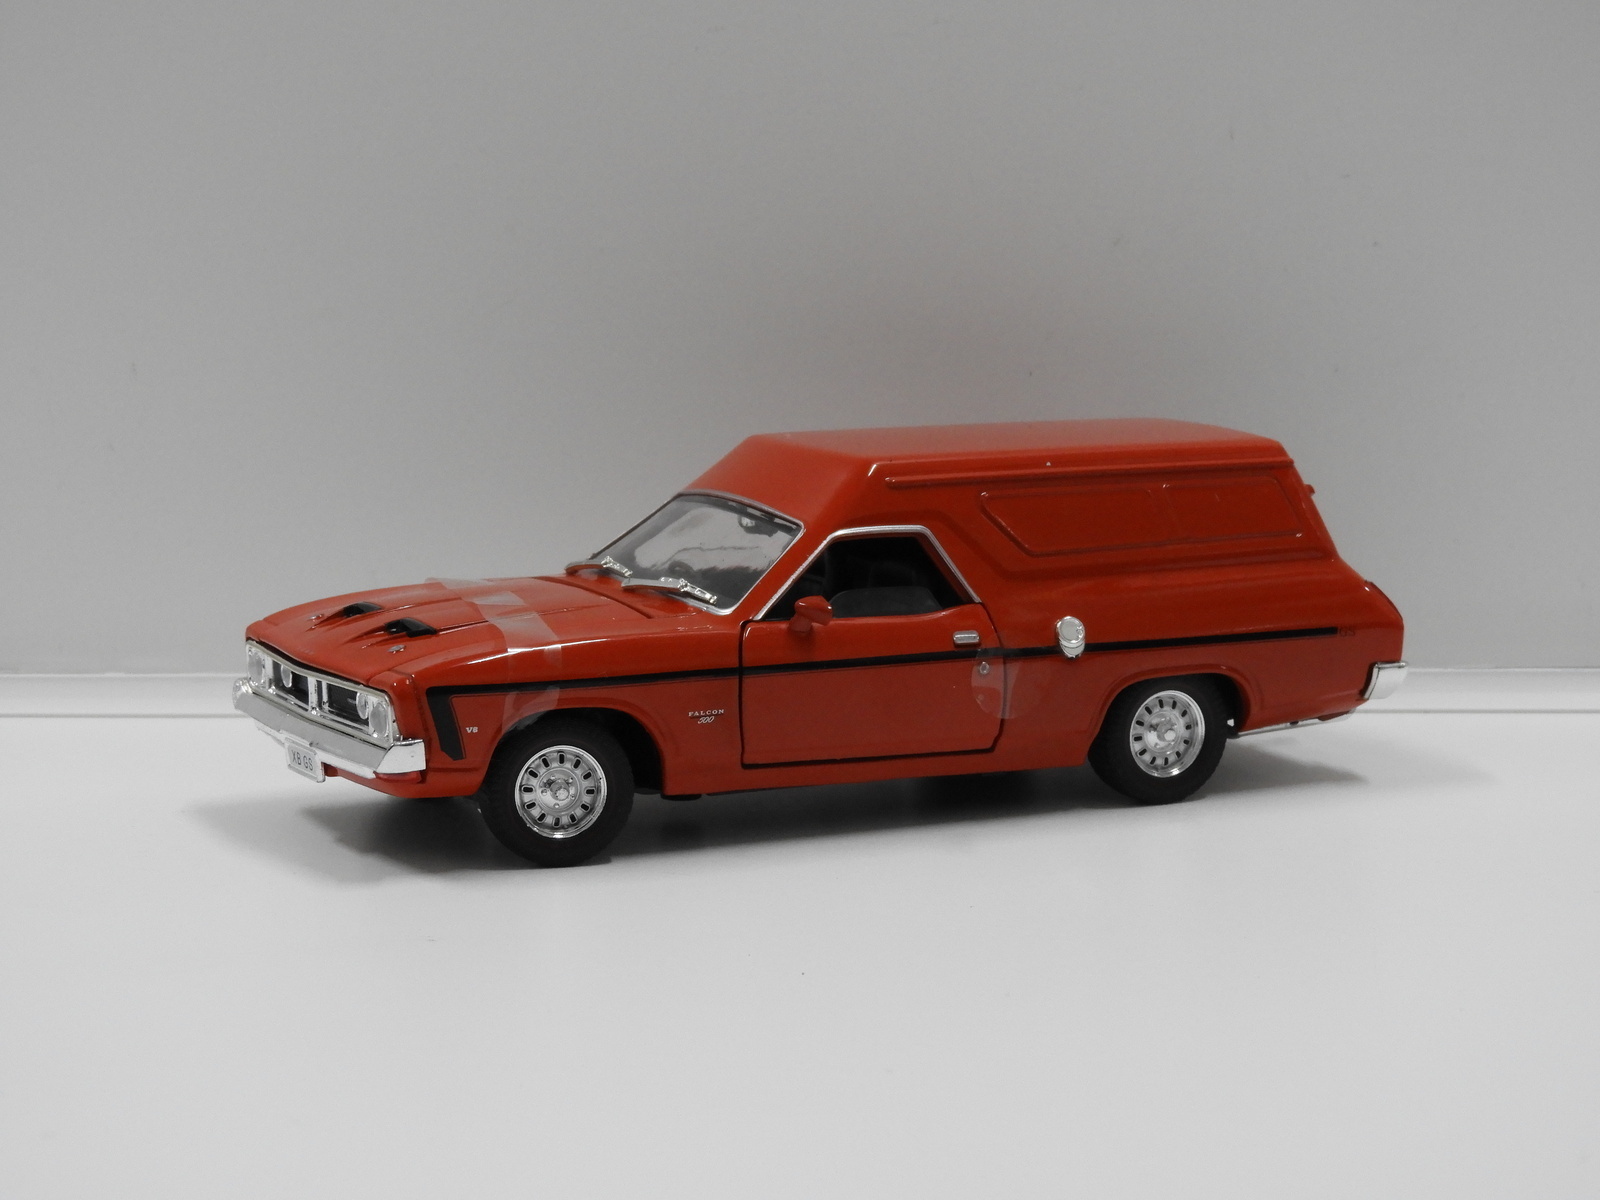 1:32 scale Diecast Falcon XB GS Panel Van in Red Pepper by Oz Legends